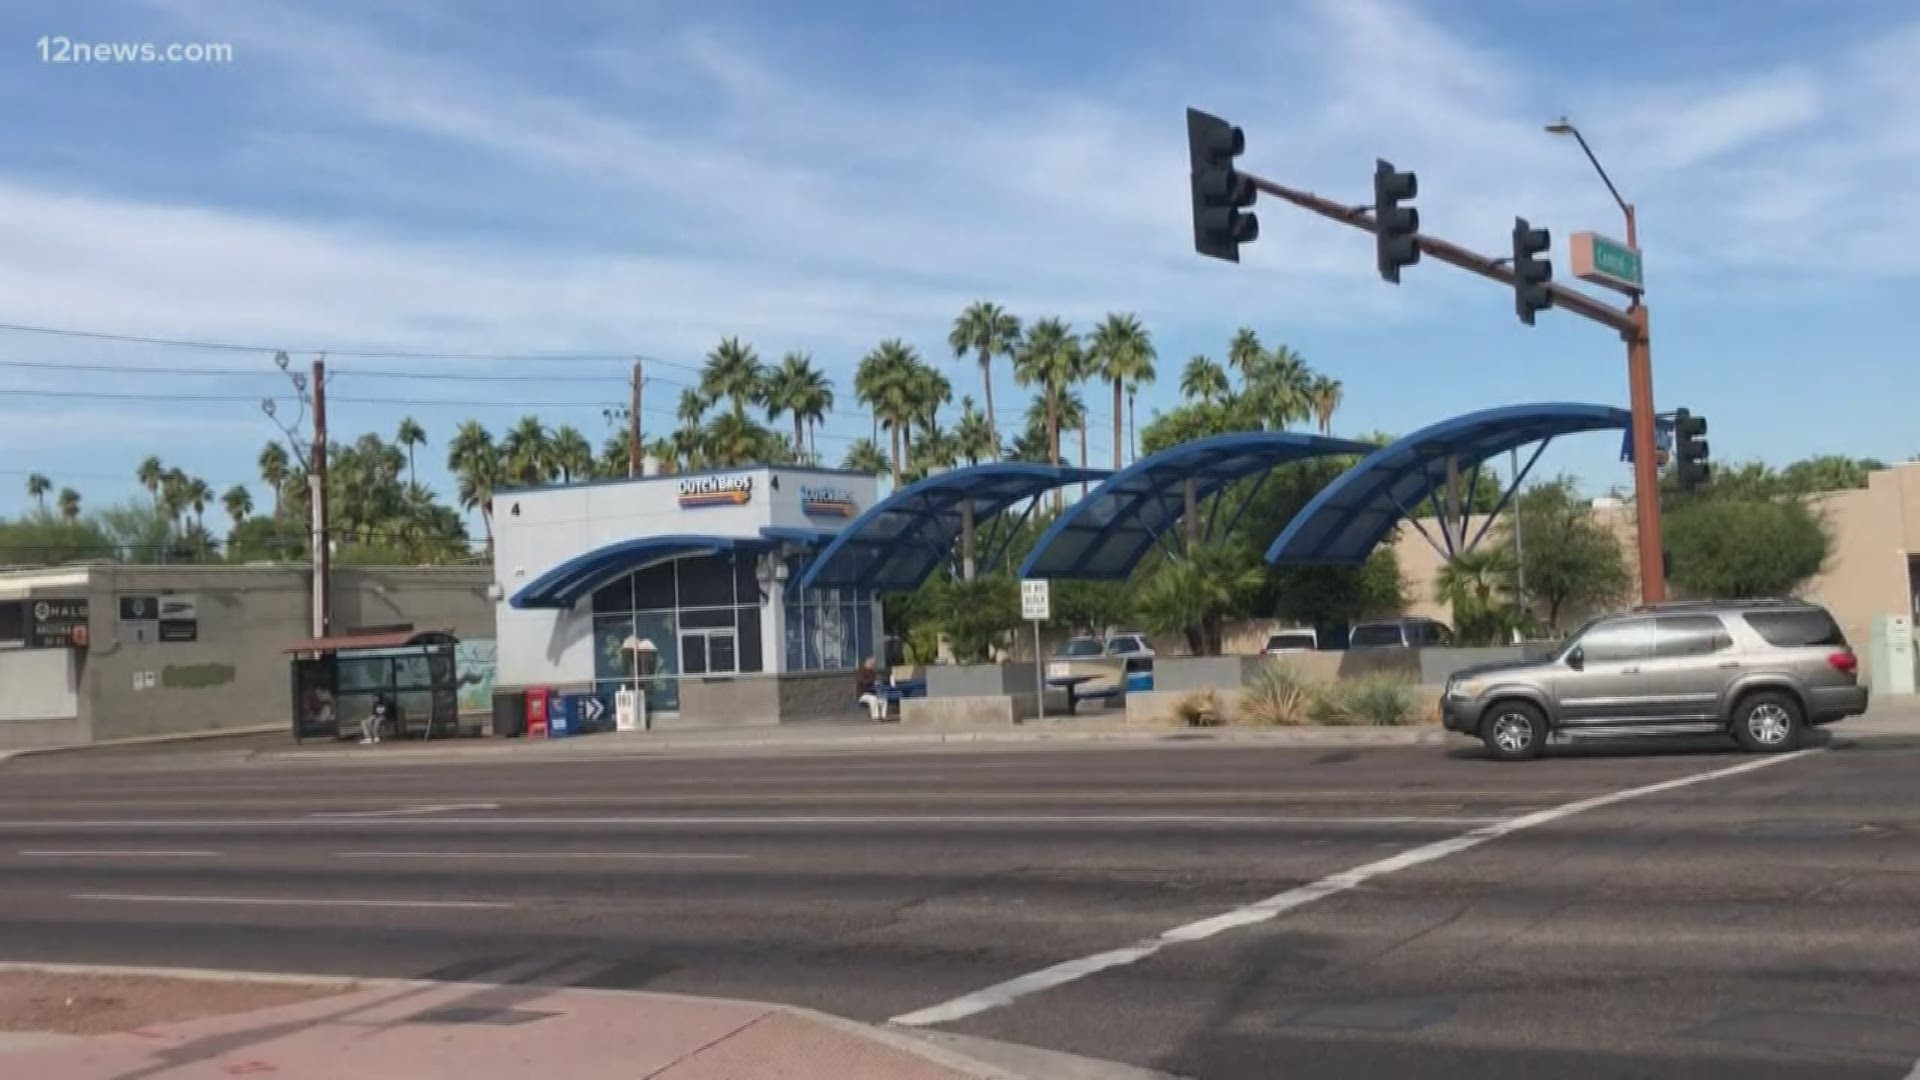 Dutch Bros Coffee fans are upset because the shop's Central and Camelback location is closing. The coffee stand has been located at the intersection for 11 years.